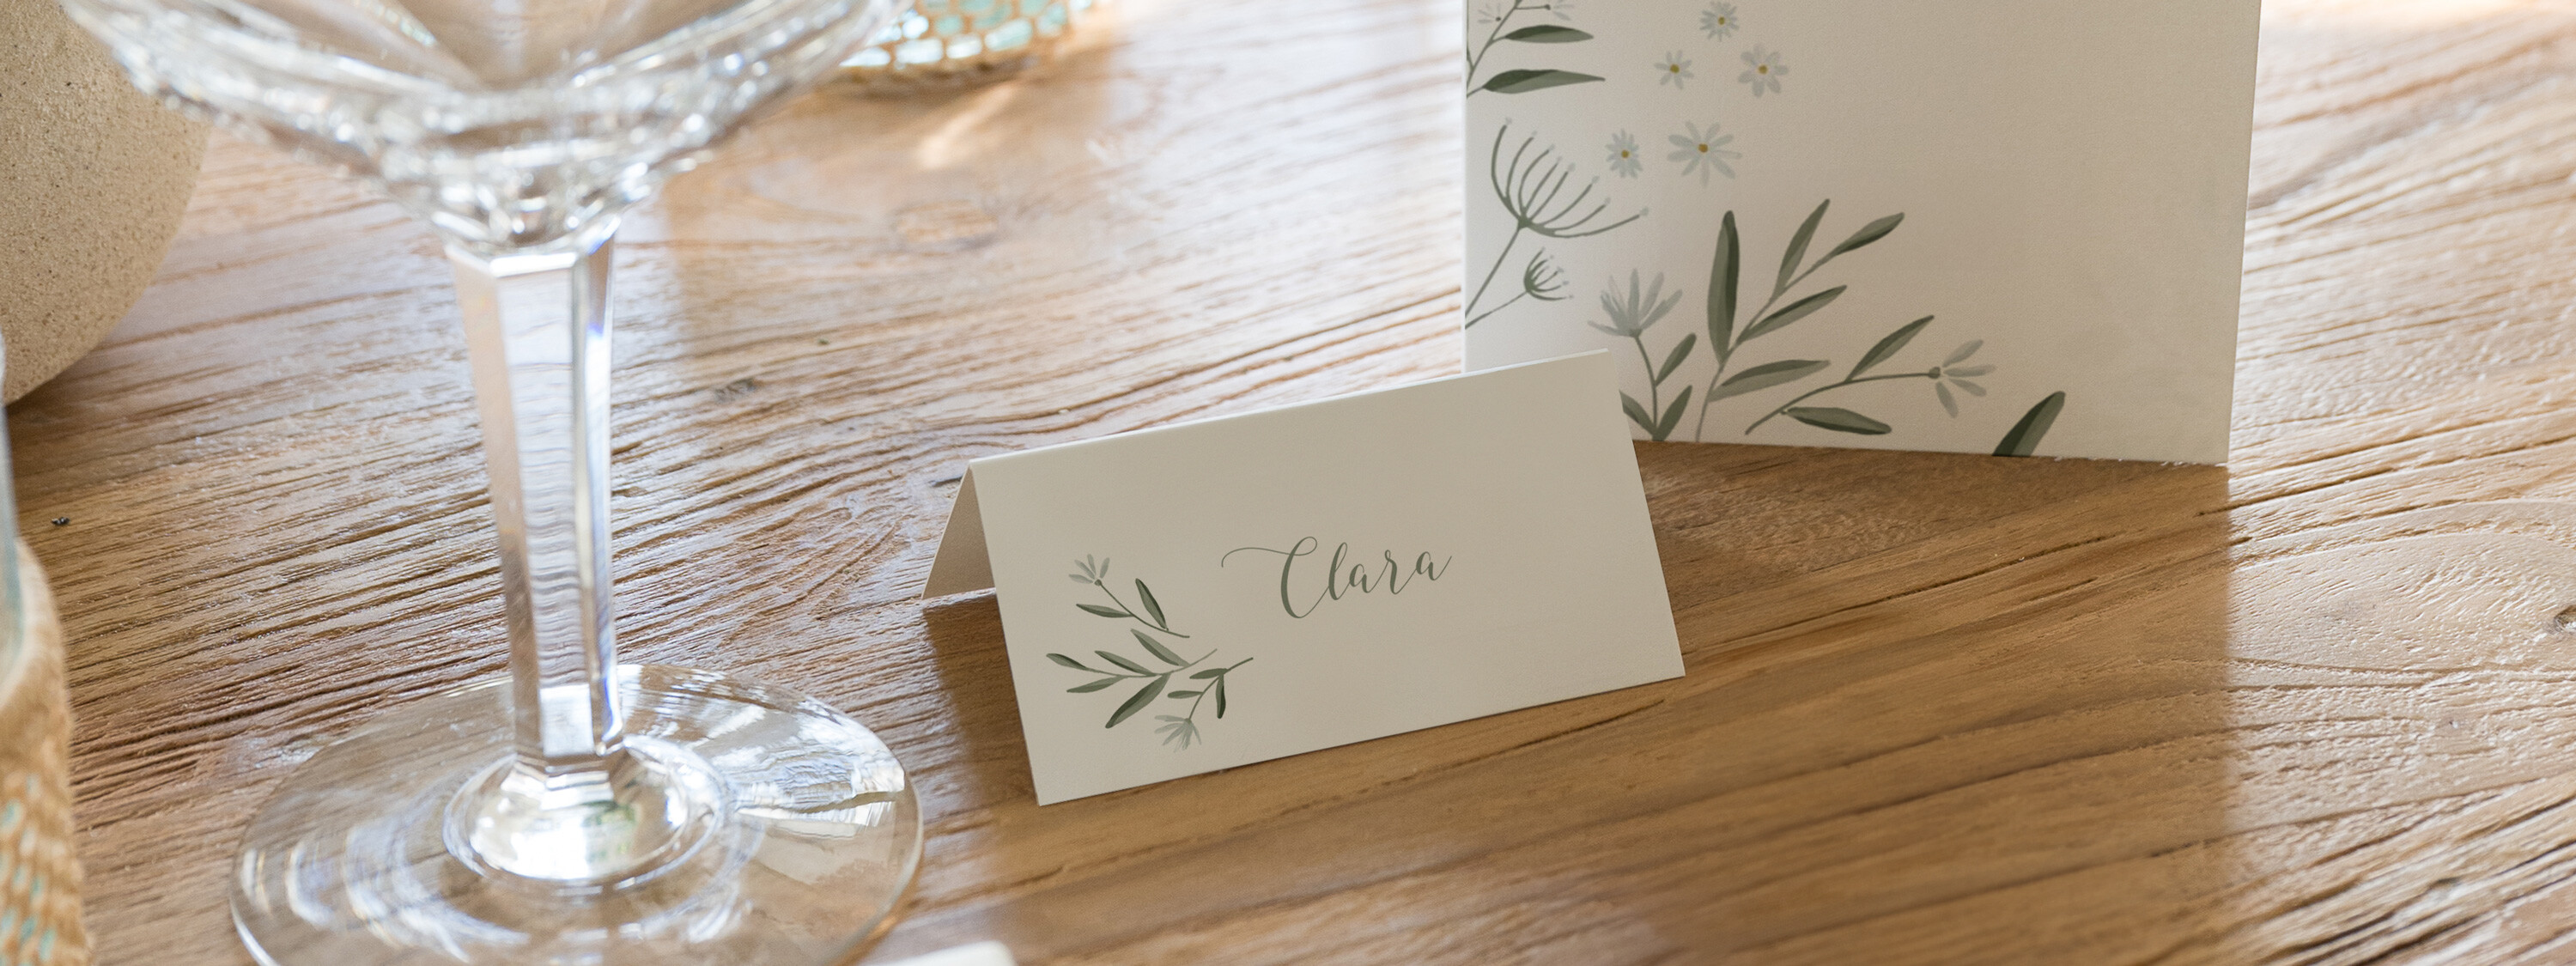 Classic Wedding Place Cards